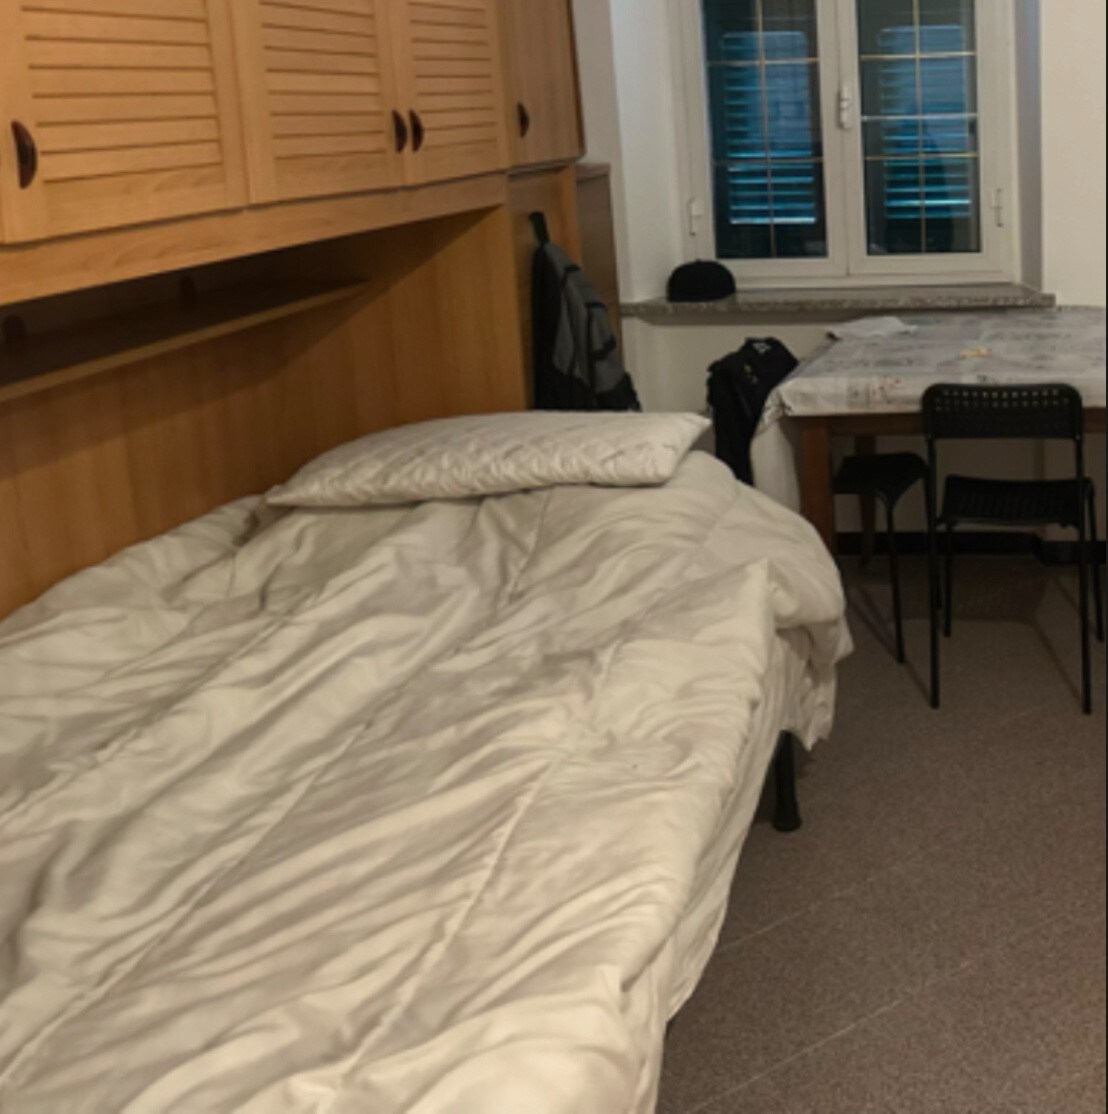 Room for rent (Shared apartment)